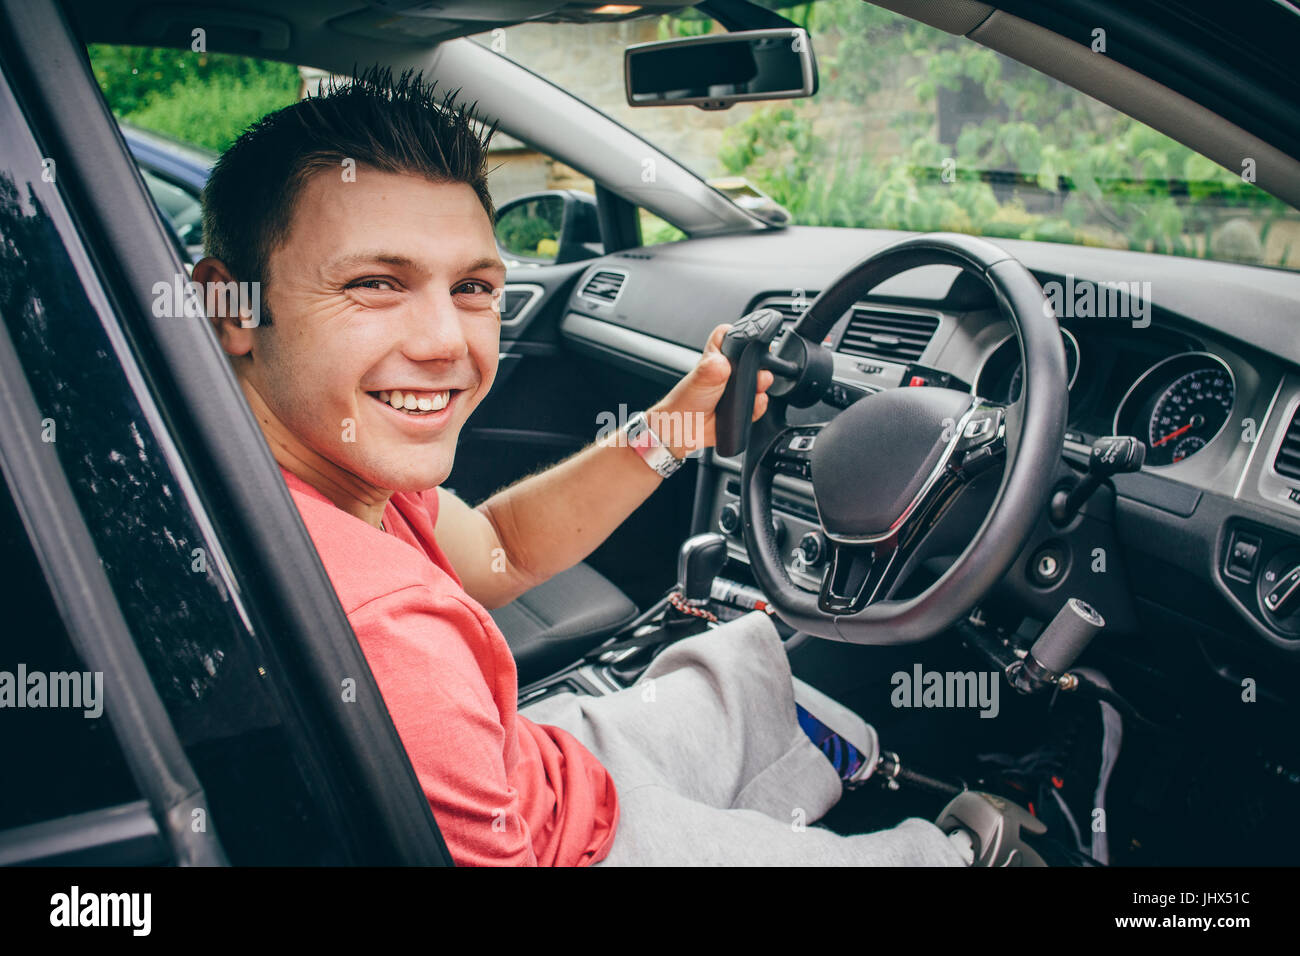 Quadriplegic man sitting in the seat of his customised control car. He is smiling for the camera. Stock Photo